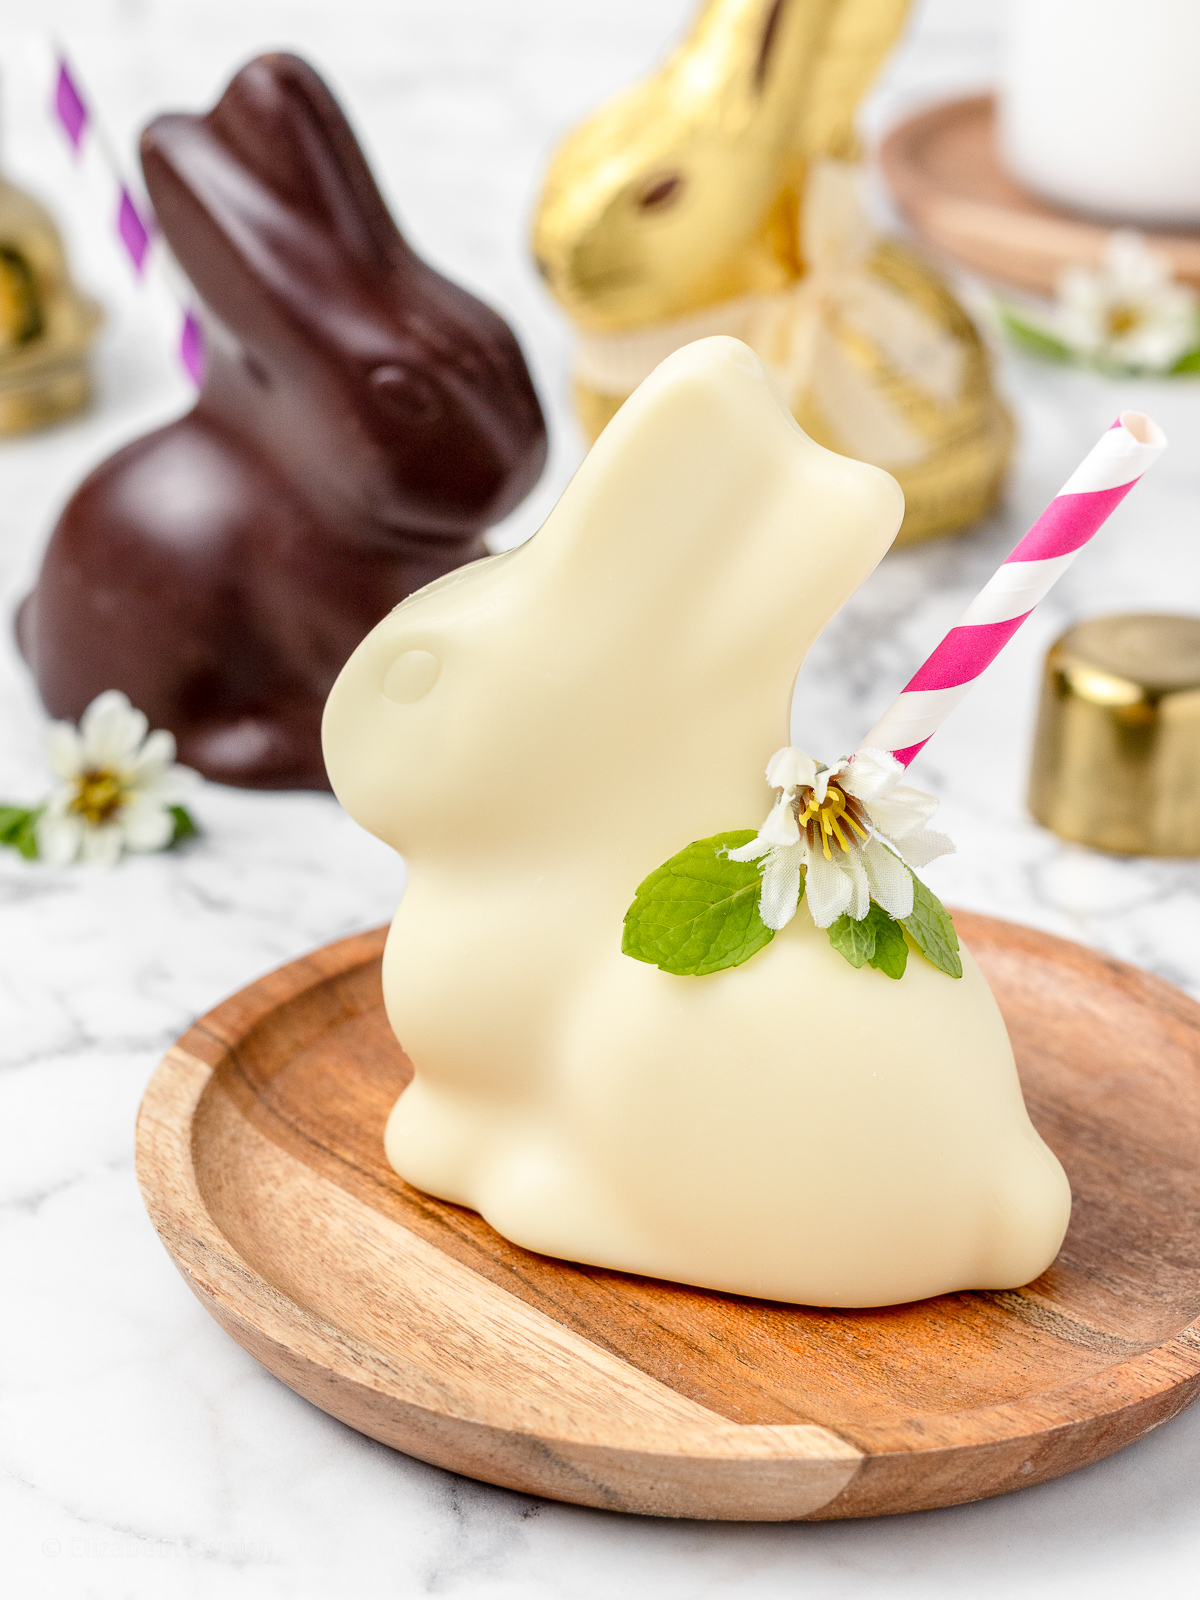 2 Chocolate Bunny Easter Mocktails garnished with a straw, mint leaves, and mini edible flour. One mocktail is white chocolate, another is milk chocolate, and there is a gold wrapped chocolate bunny in the background.